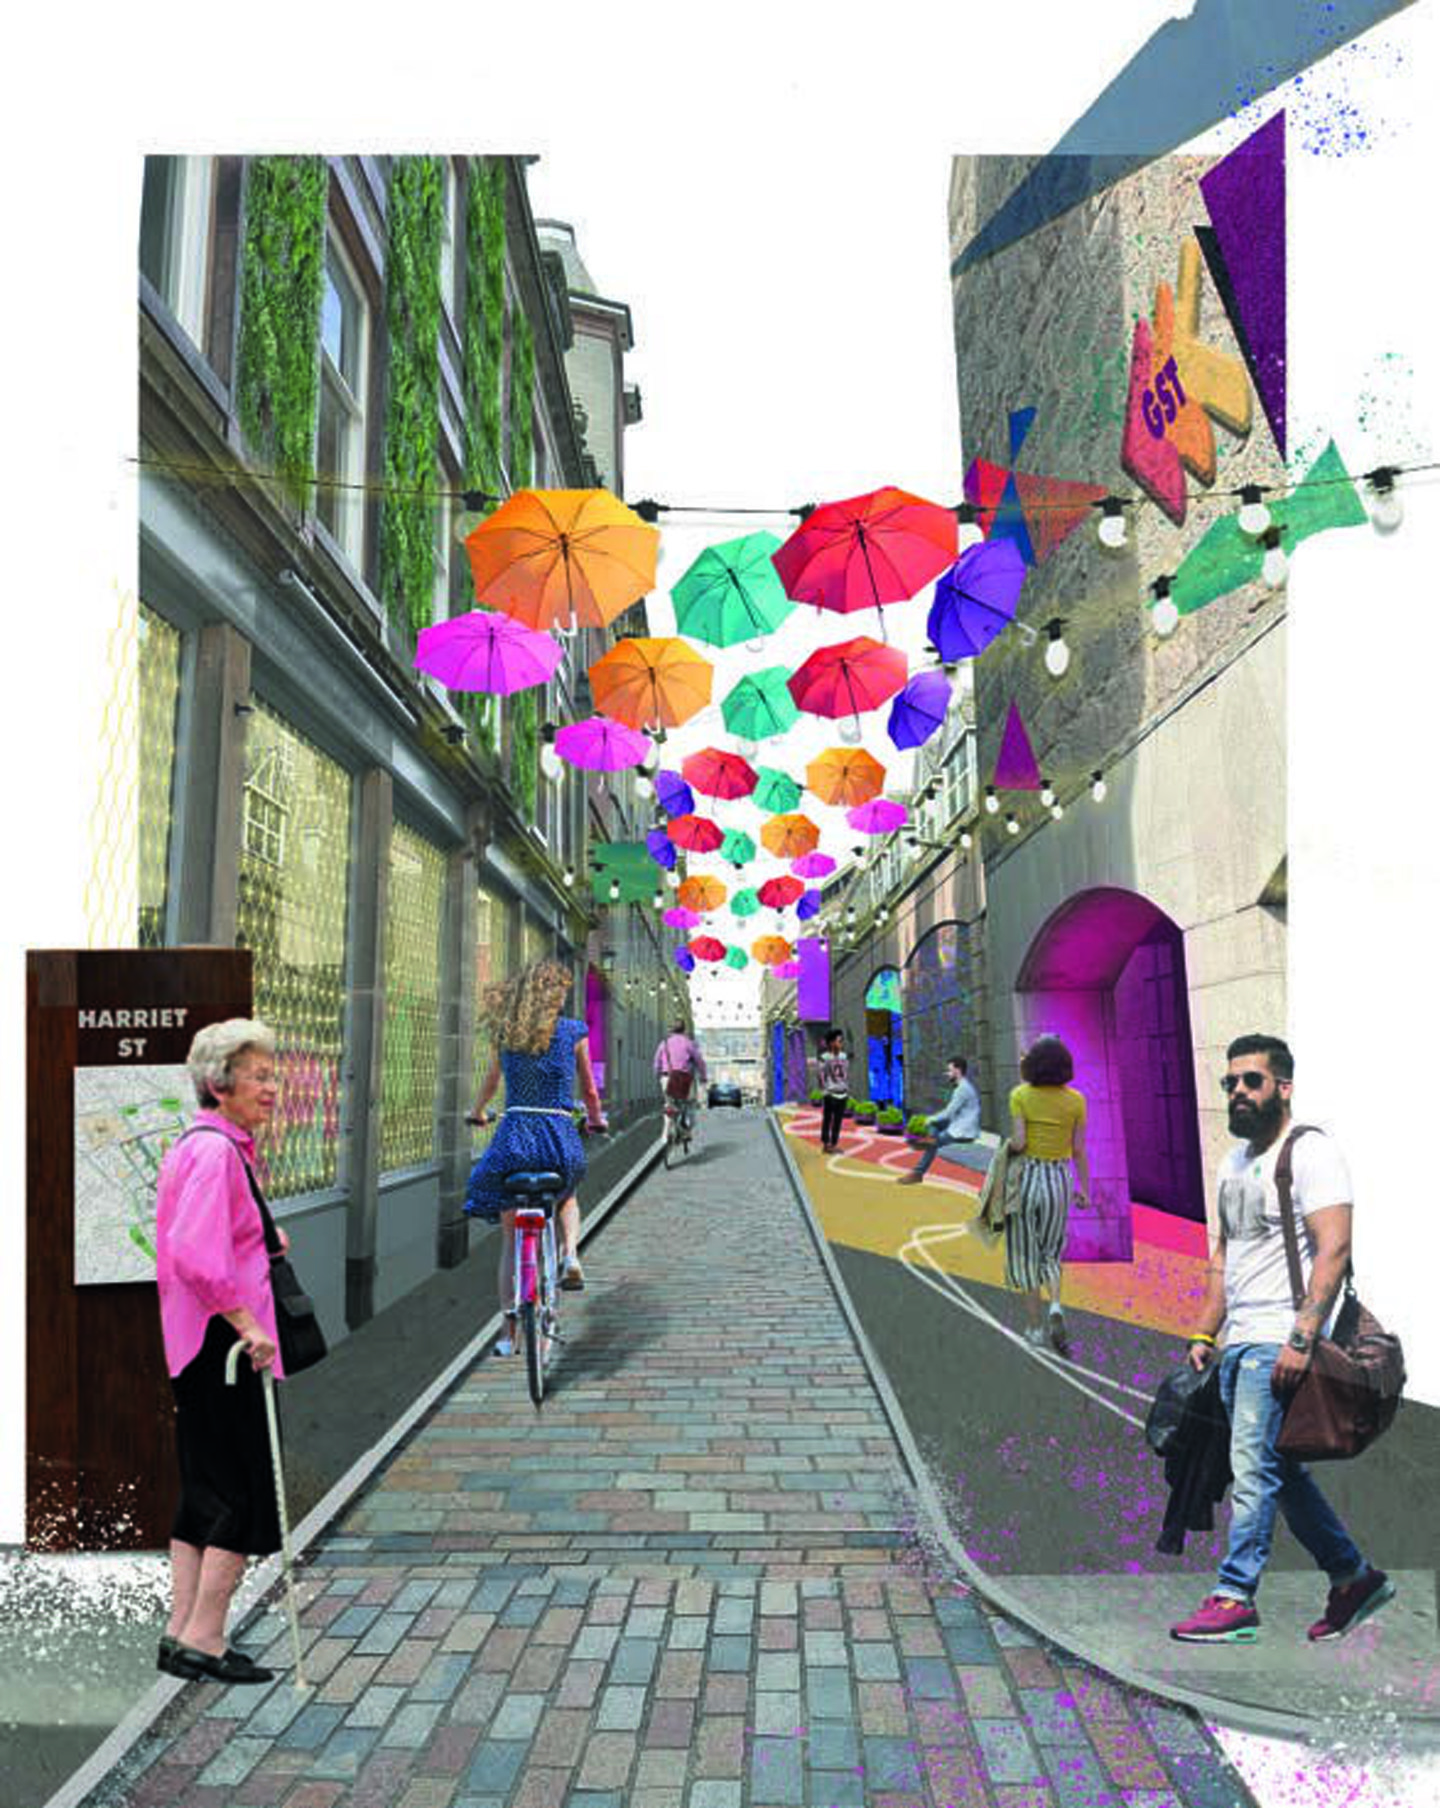 Strings of lights could brighten up Harriet Street, which would be revamped to make a single, wider pavement on its eastern side. The road is a key route north of the city centre into the George Street area. Image: Aberdeen City Council